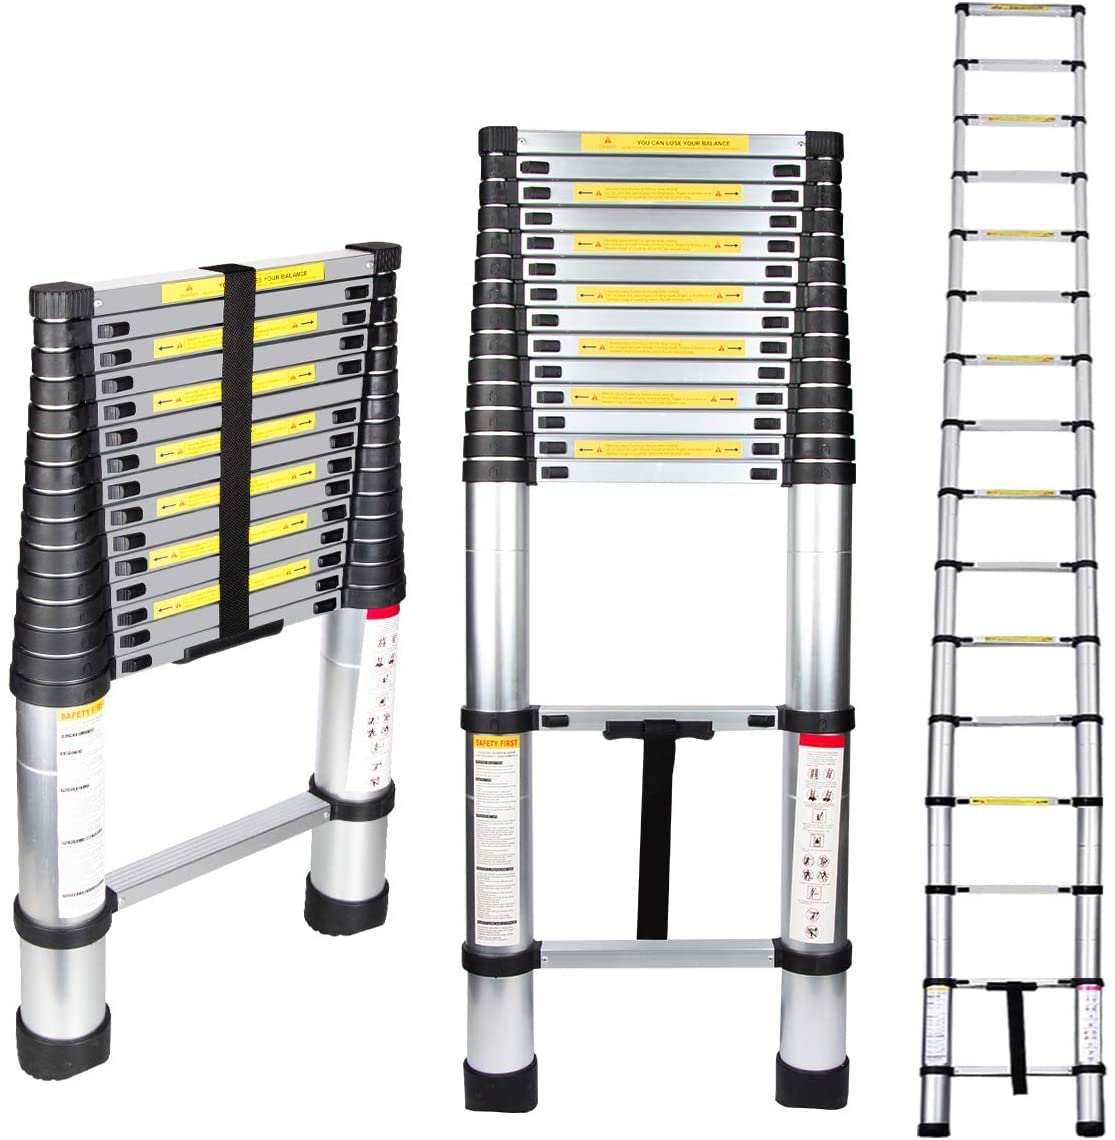 KRISHYAM® Telescoping Telescopic Extension Ladder 20.5 FT/6.2m Aluminum Alloy Extendable Lightweight Ladder Steps Safety for Roofing Business, Household Use, Outdoor Work, 330 lbs Capacity